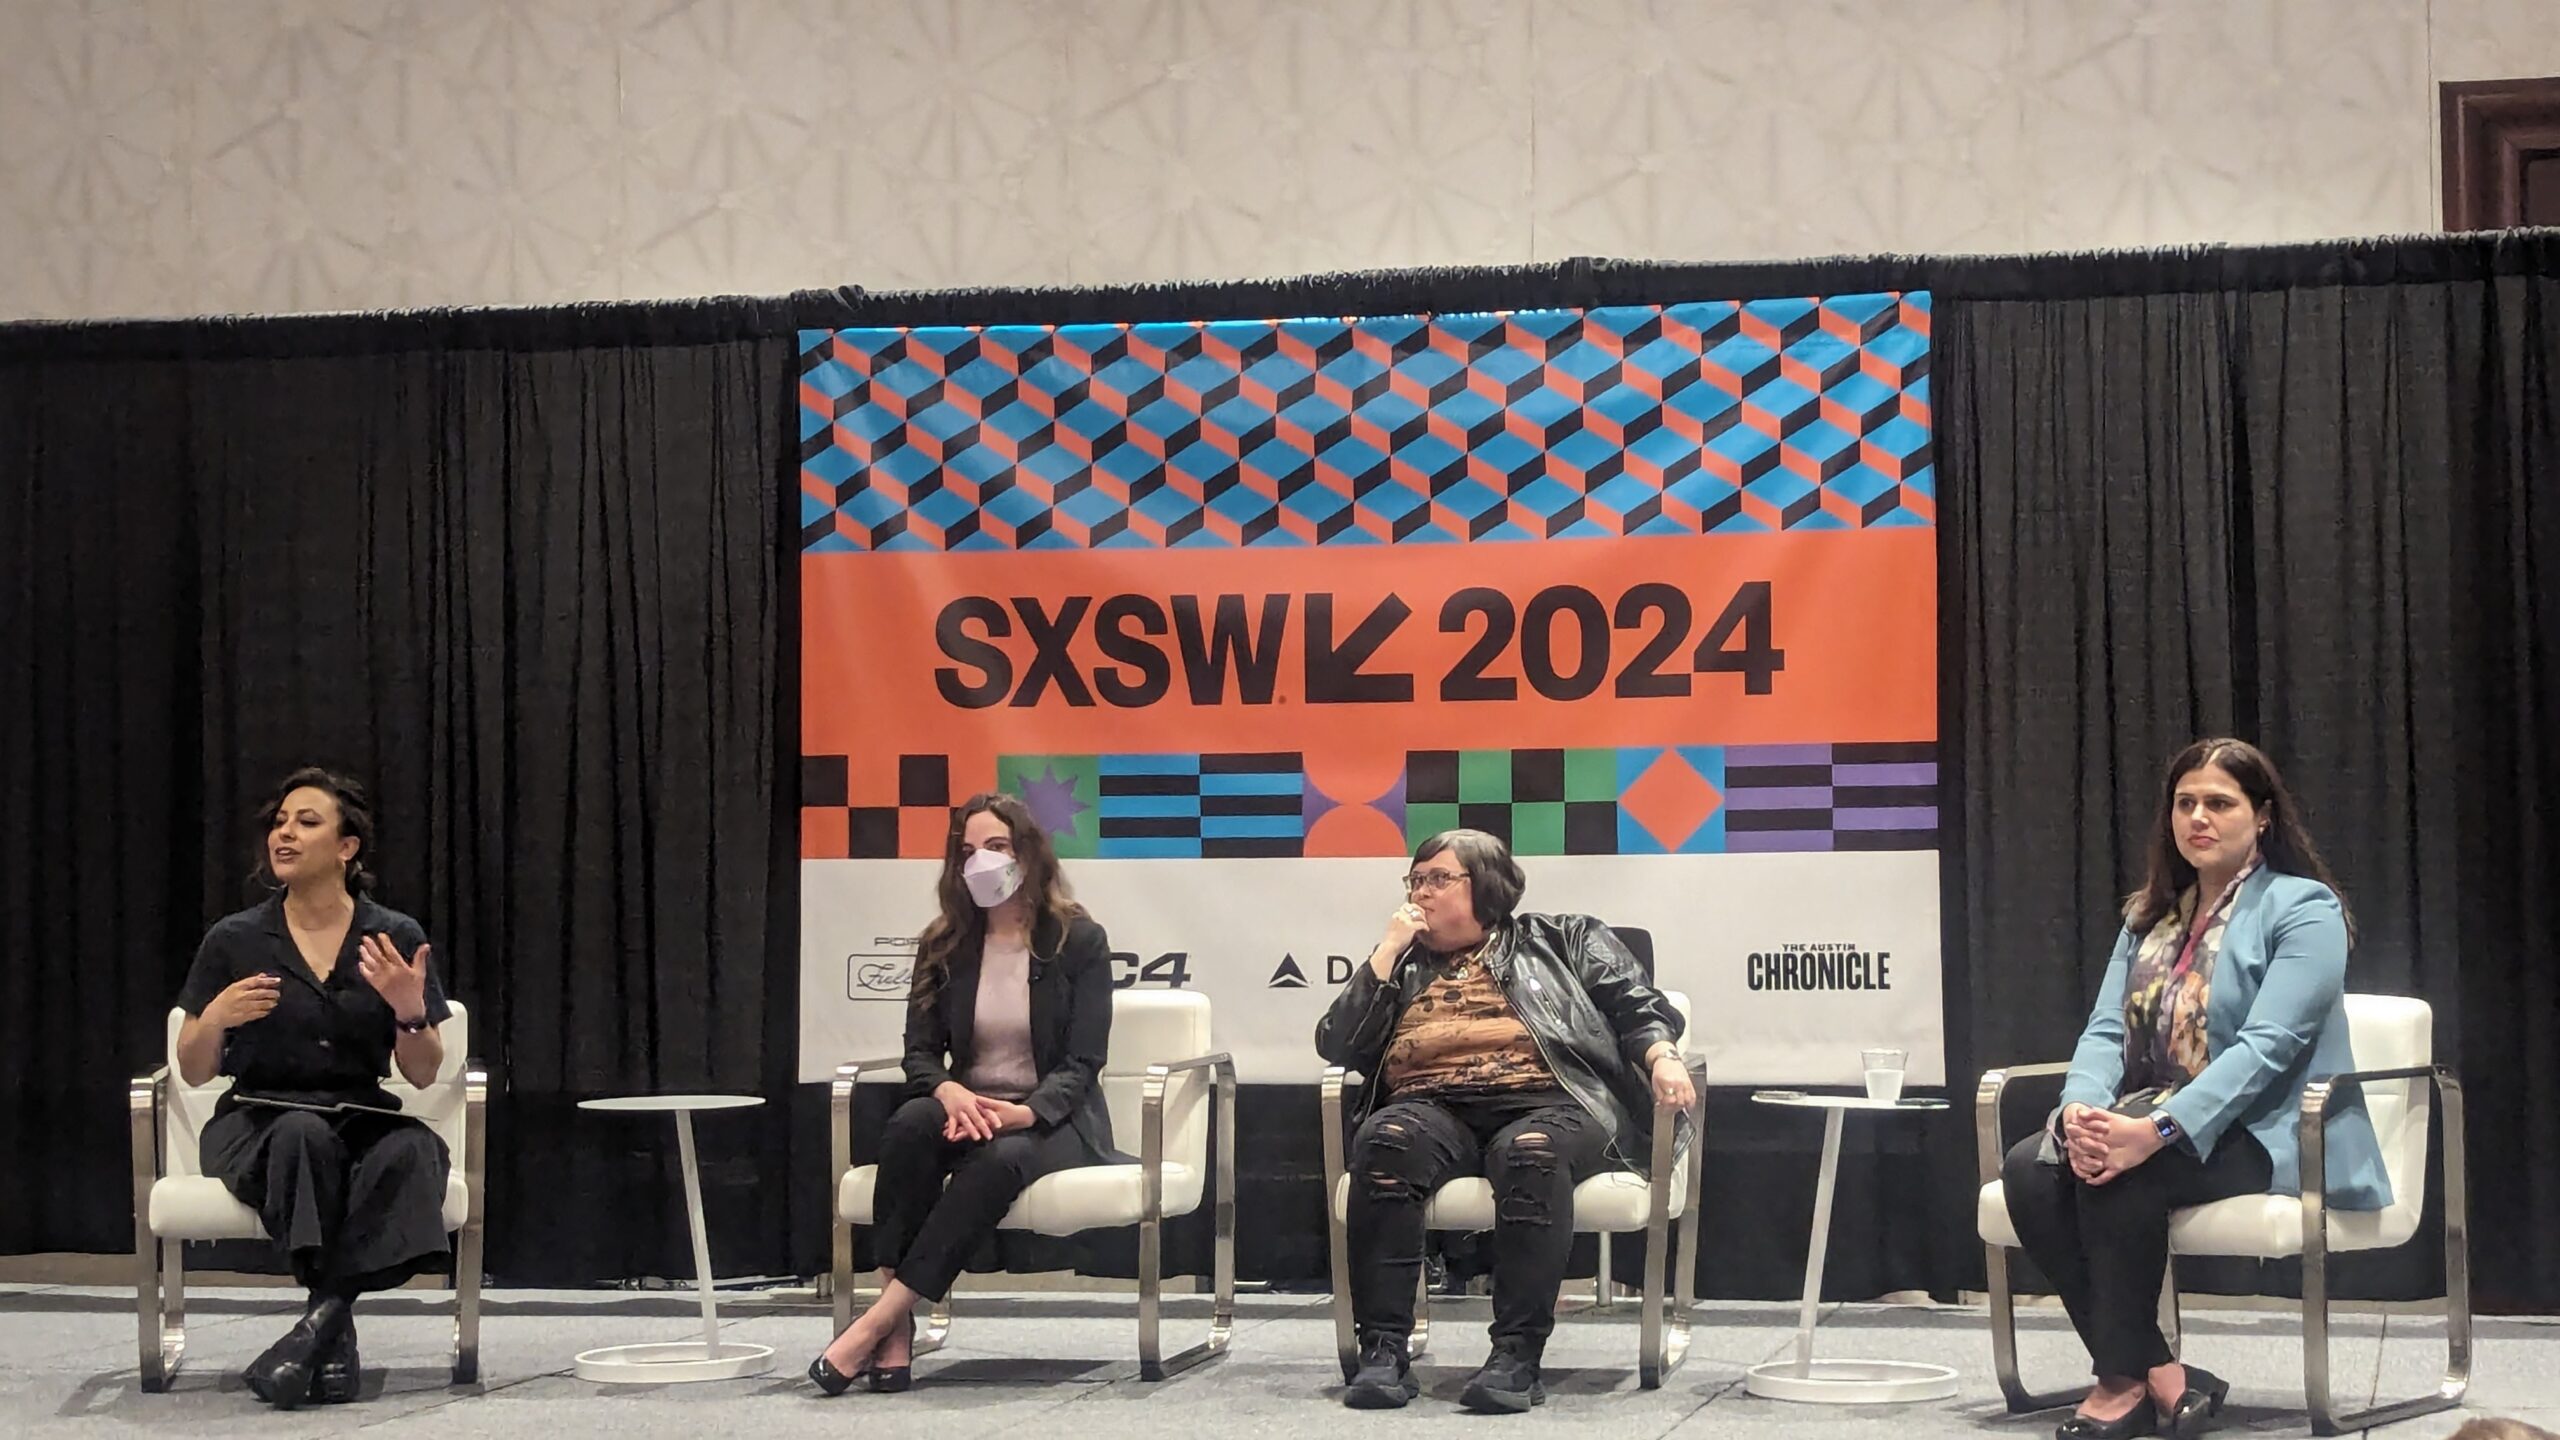 The Specter of Disinformation Haunts South by Southwest